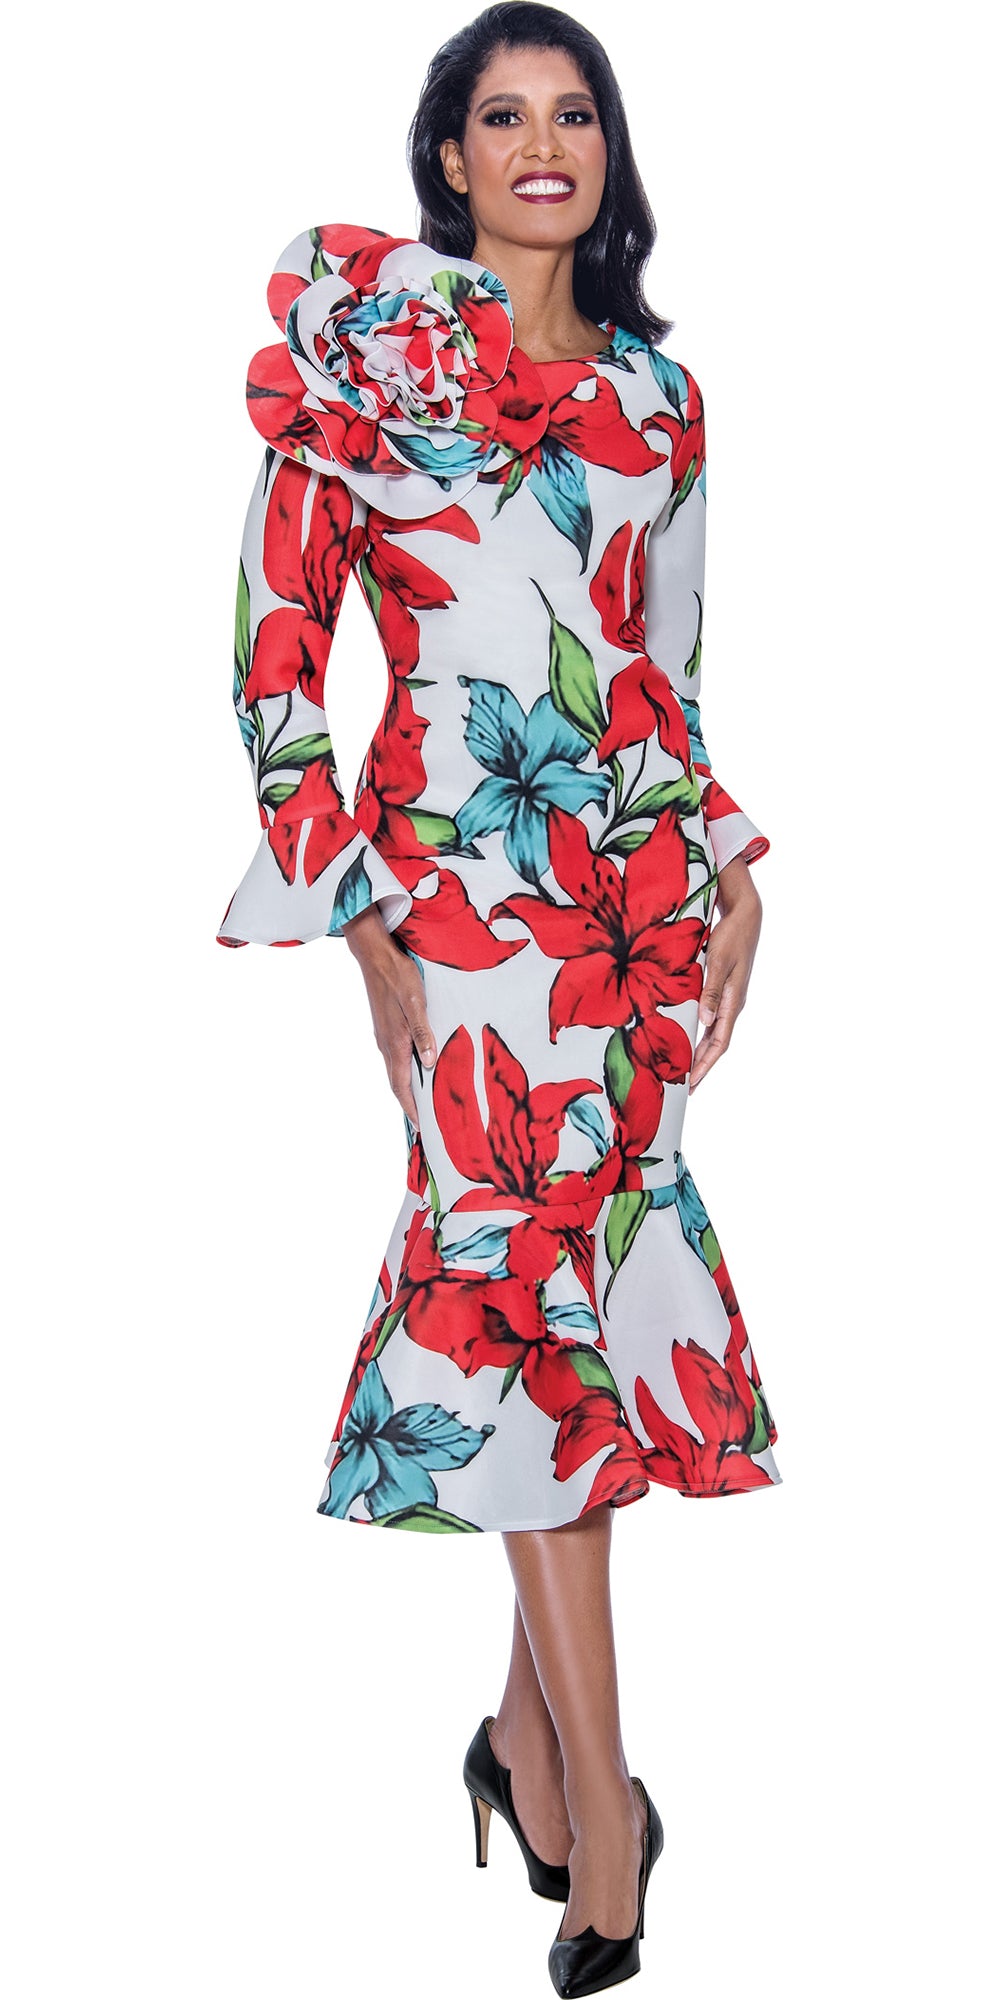 Dresses by Nubiano 12371 - Multi - Scuba Fabric Dress with Oversized Shoulder Flower